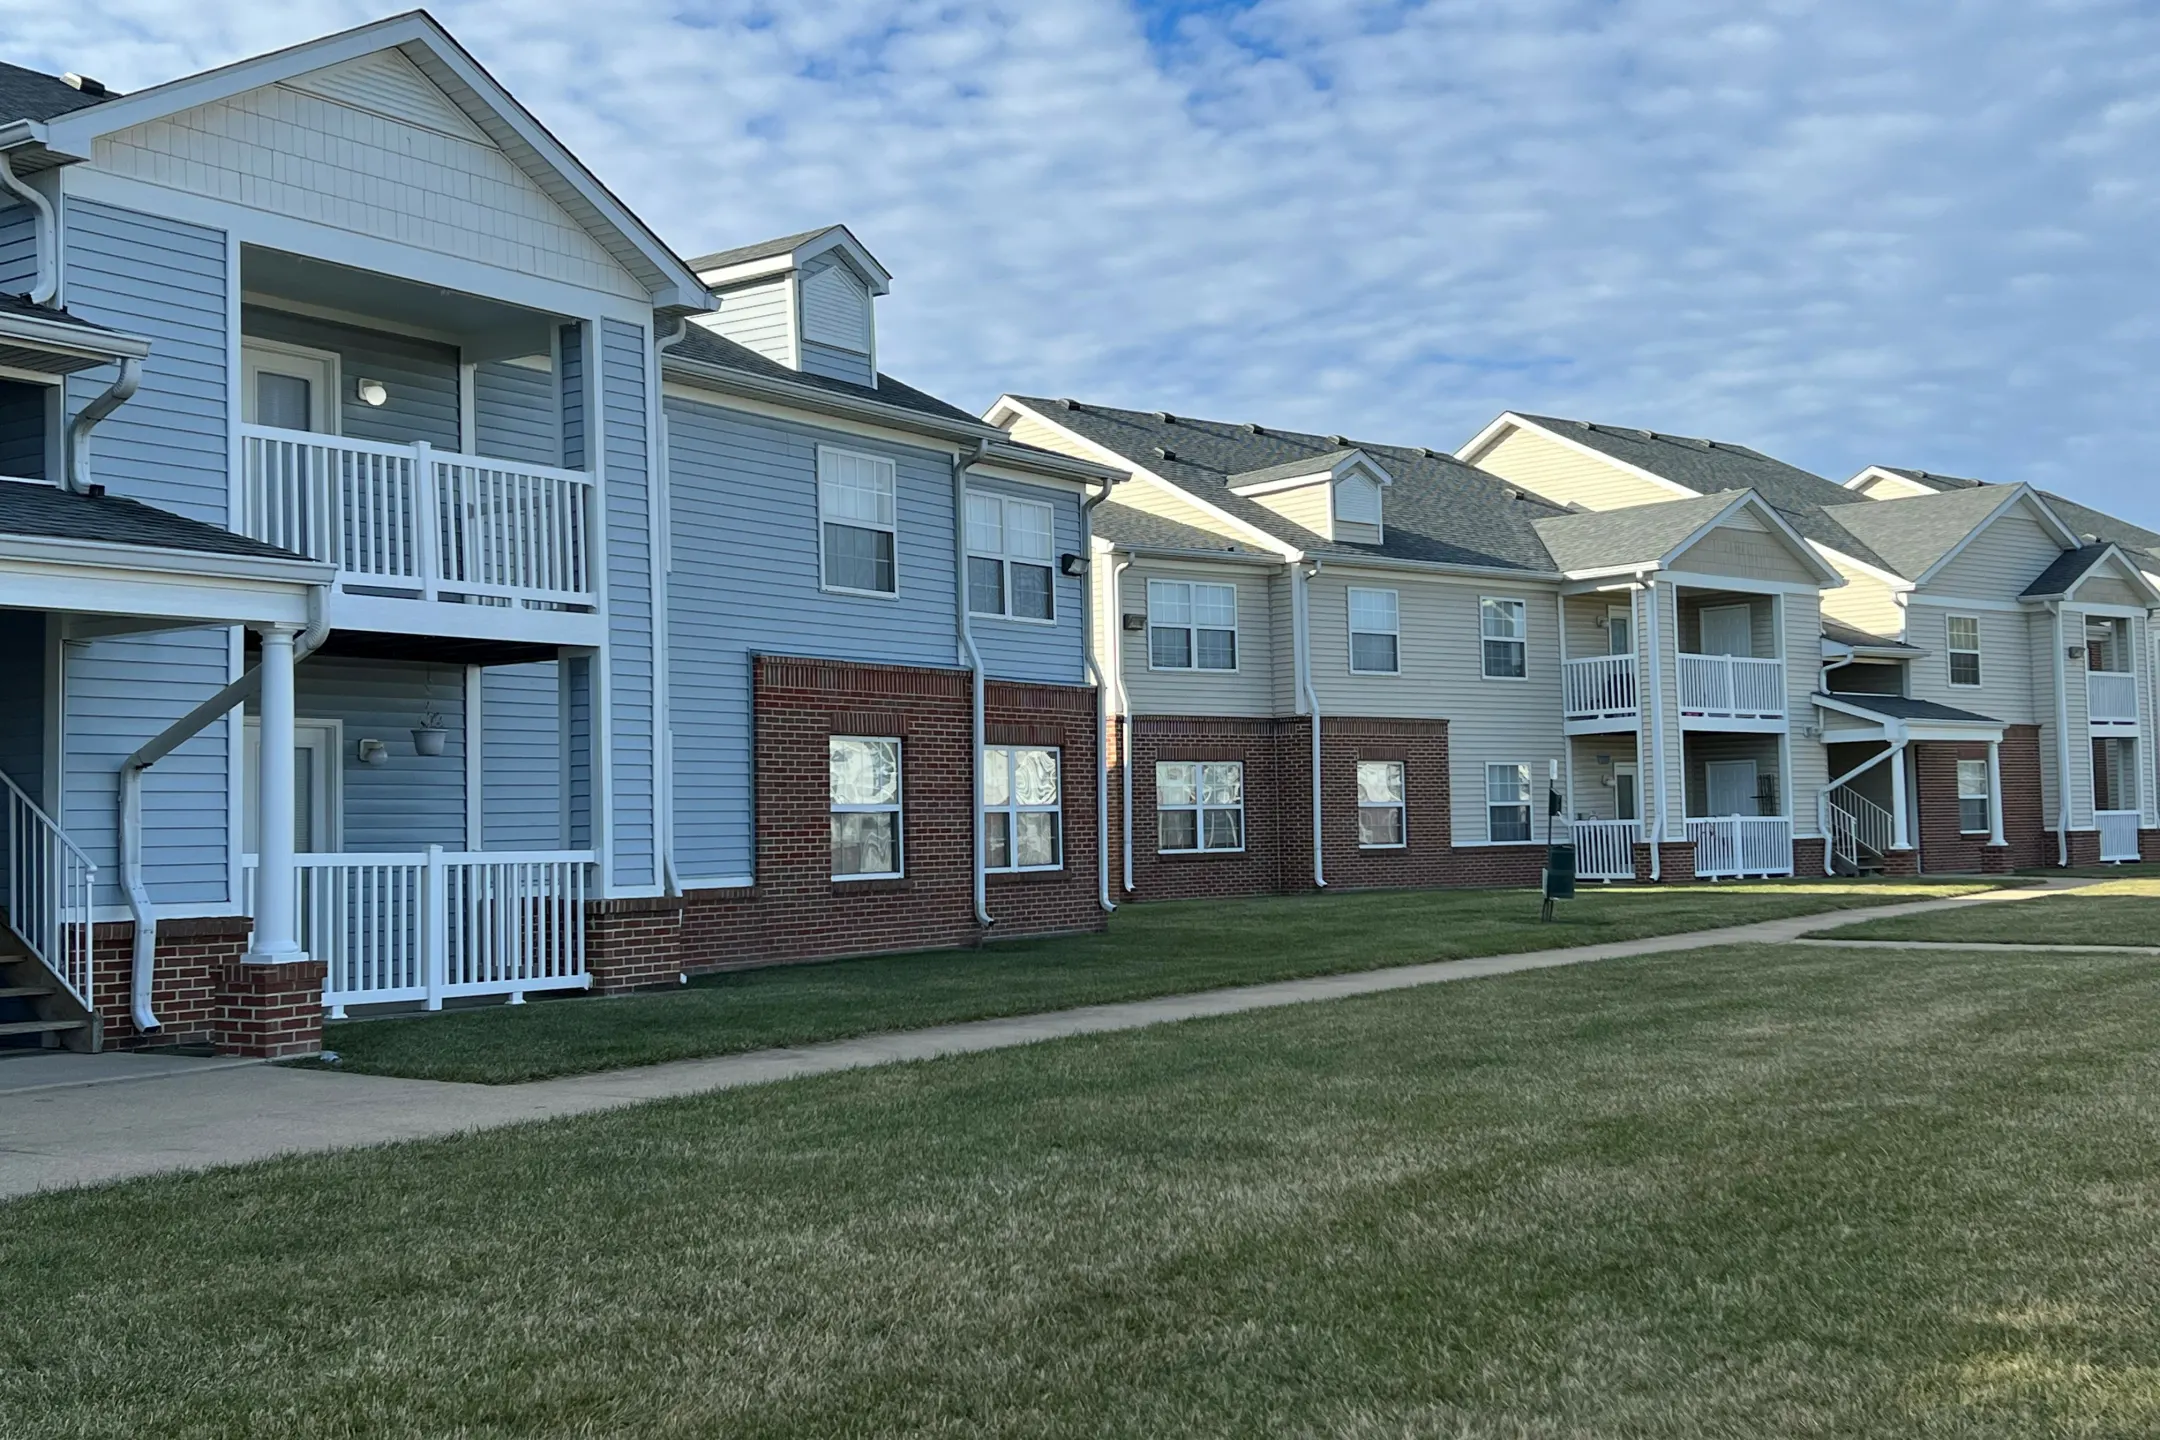 Building - Village Crossing Apartments - Greenwood, IN